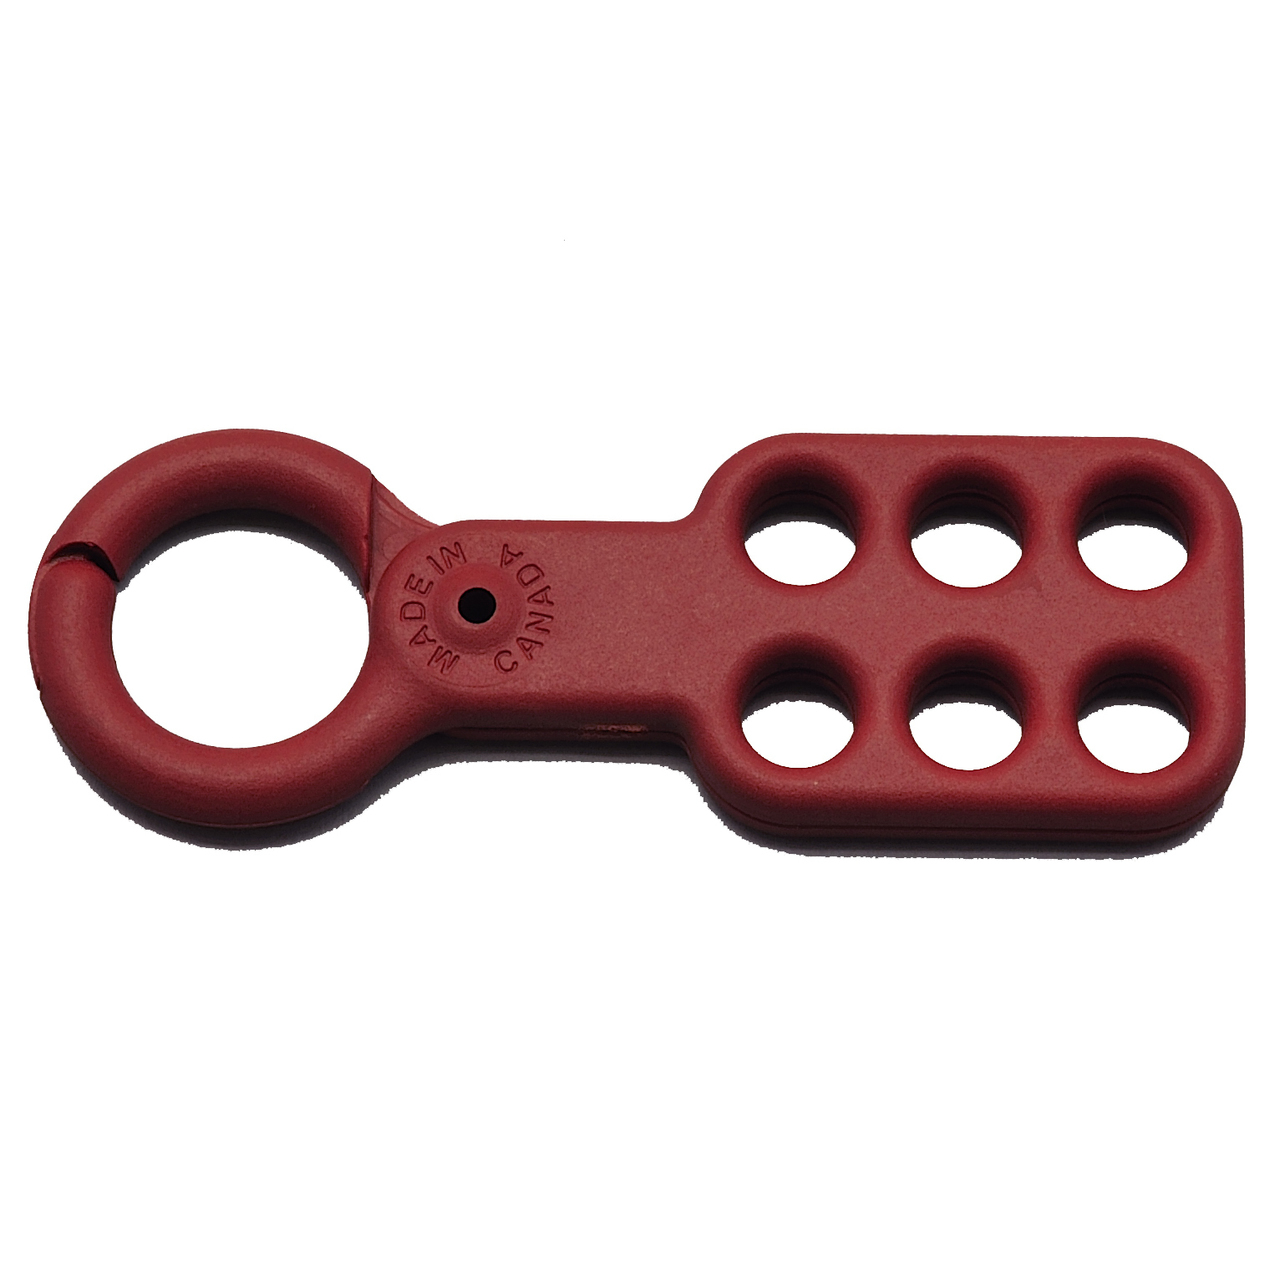 ZING RecycLockout Lockout Tagout Hasp, 1 Inch Recycled Plastic